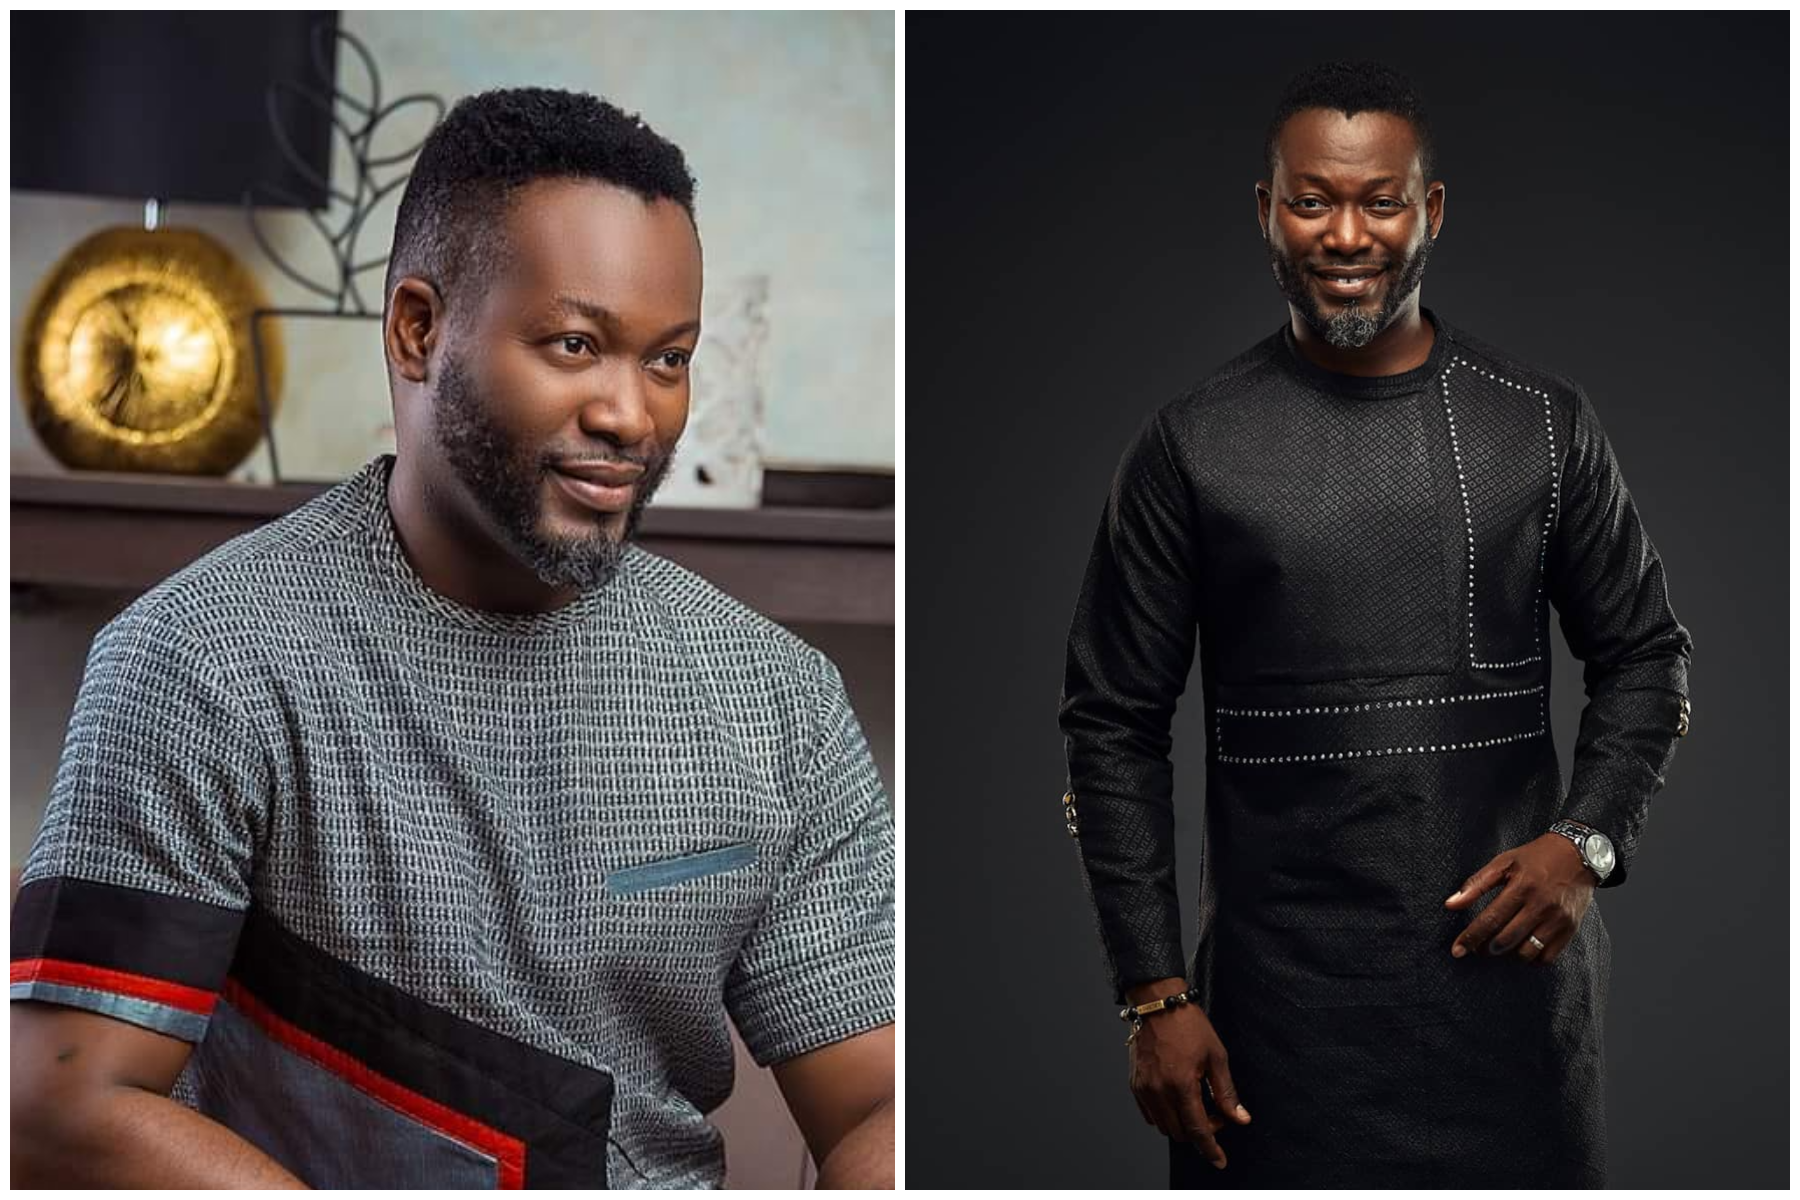 Meet Ghanaian actor Adjetey Anang: age, movies, wife, net worth, latest updates